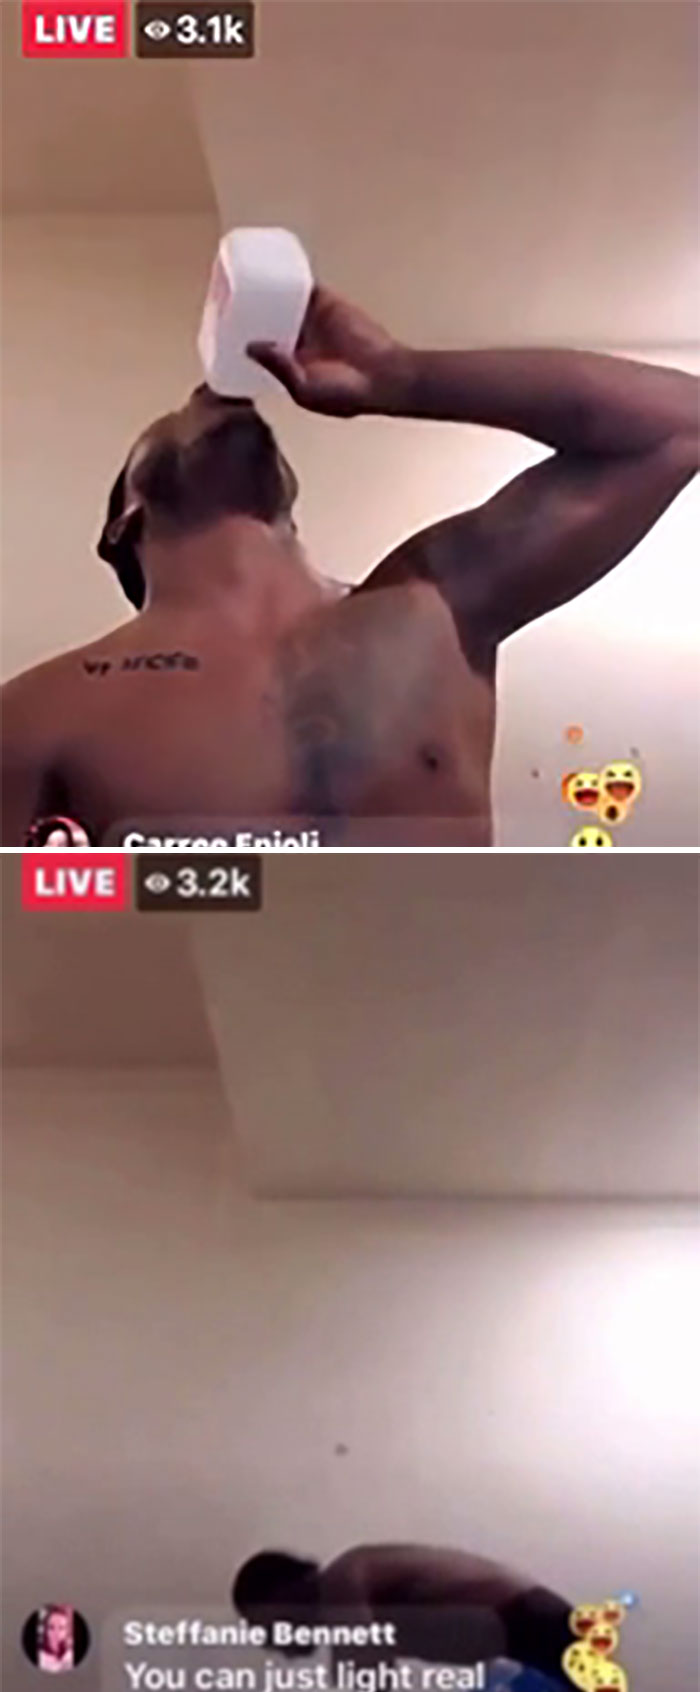 Man Drinks Bottle Of Rubbing Alcohol For Facebook Live